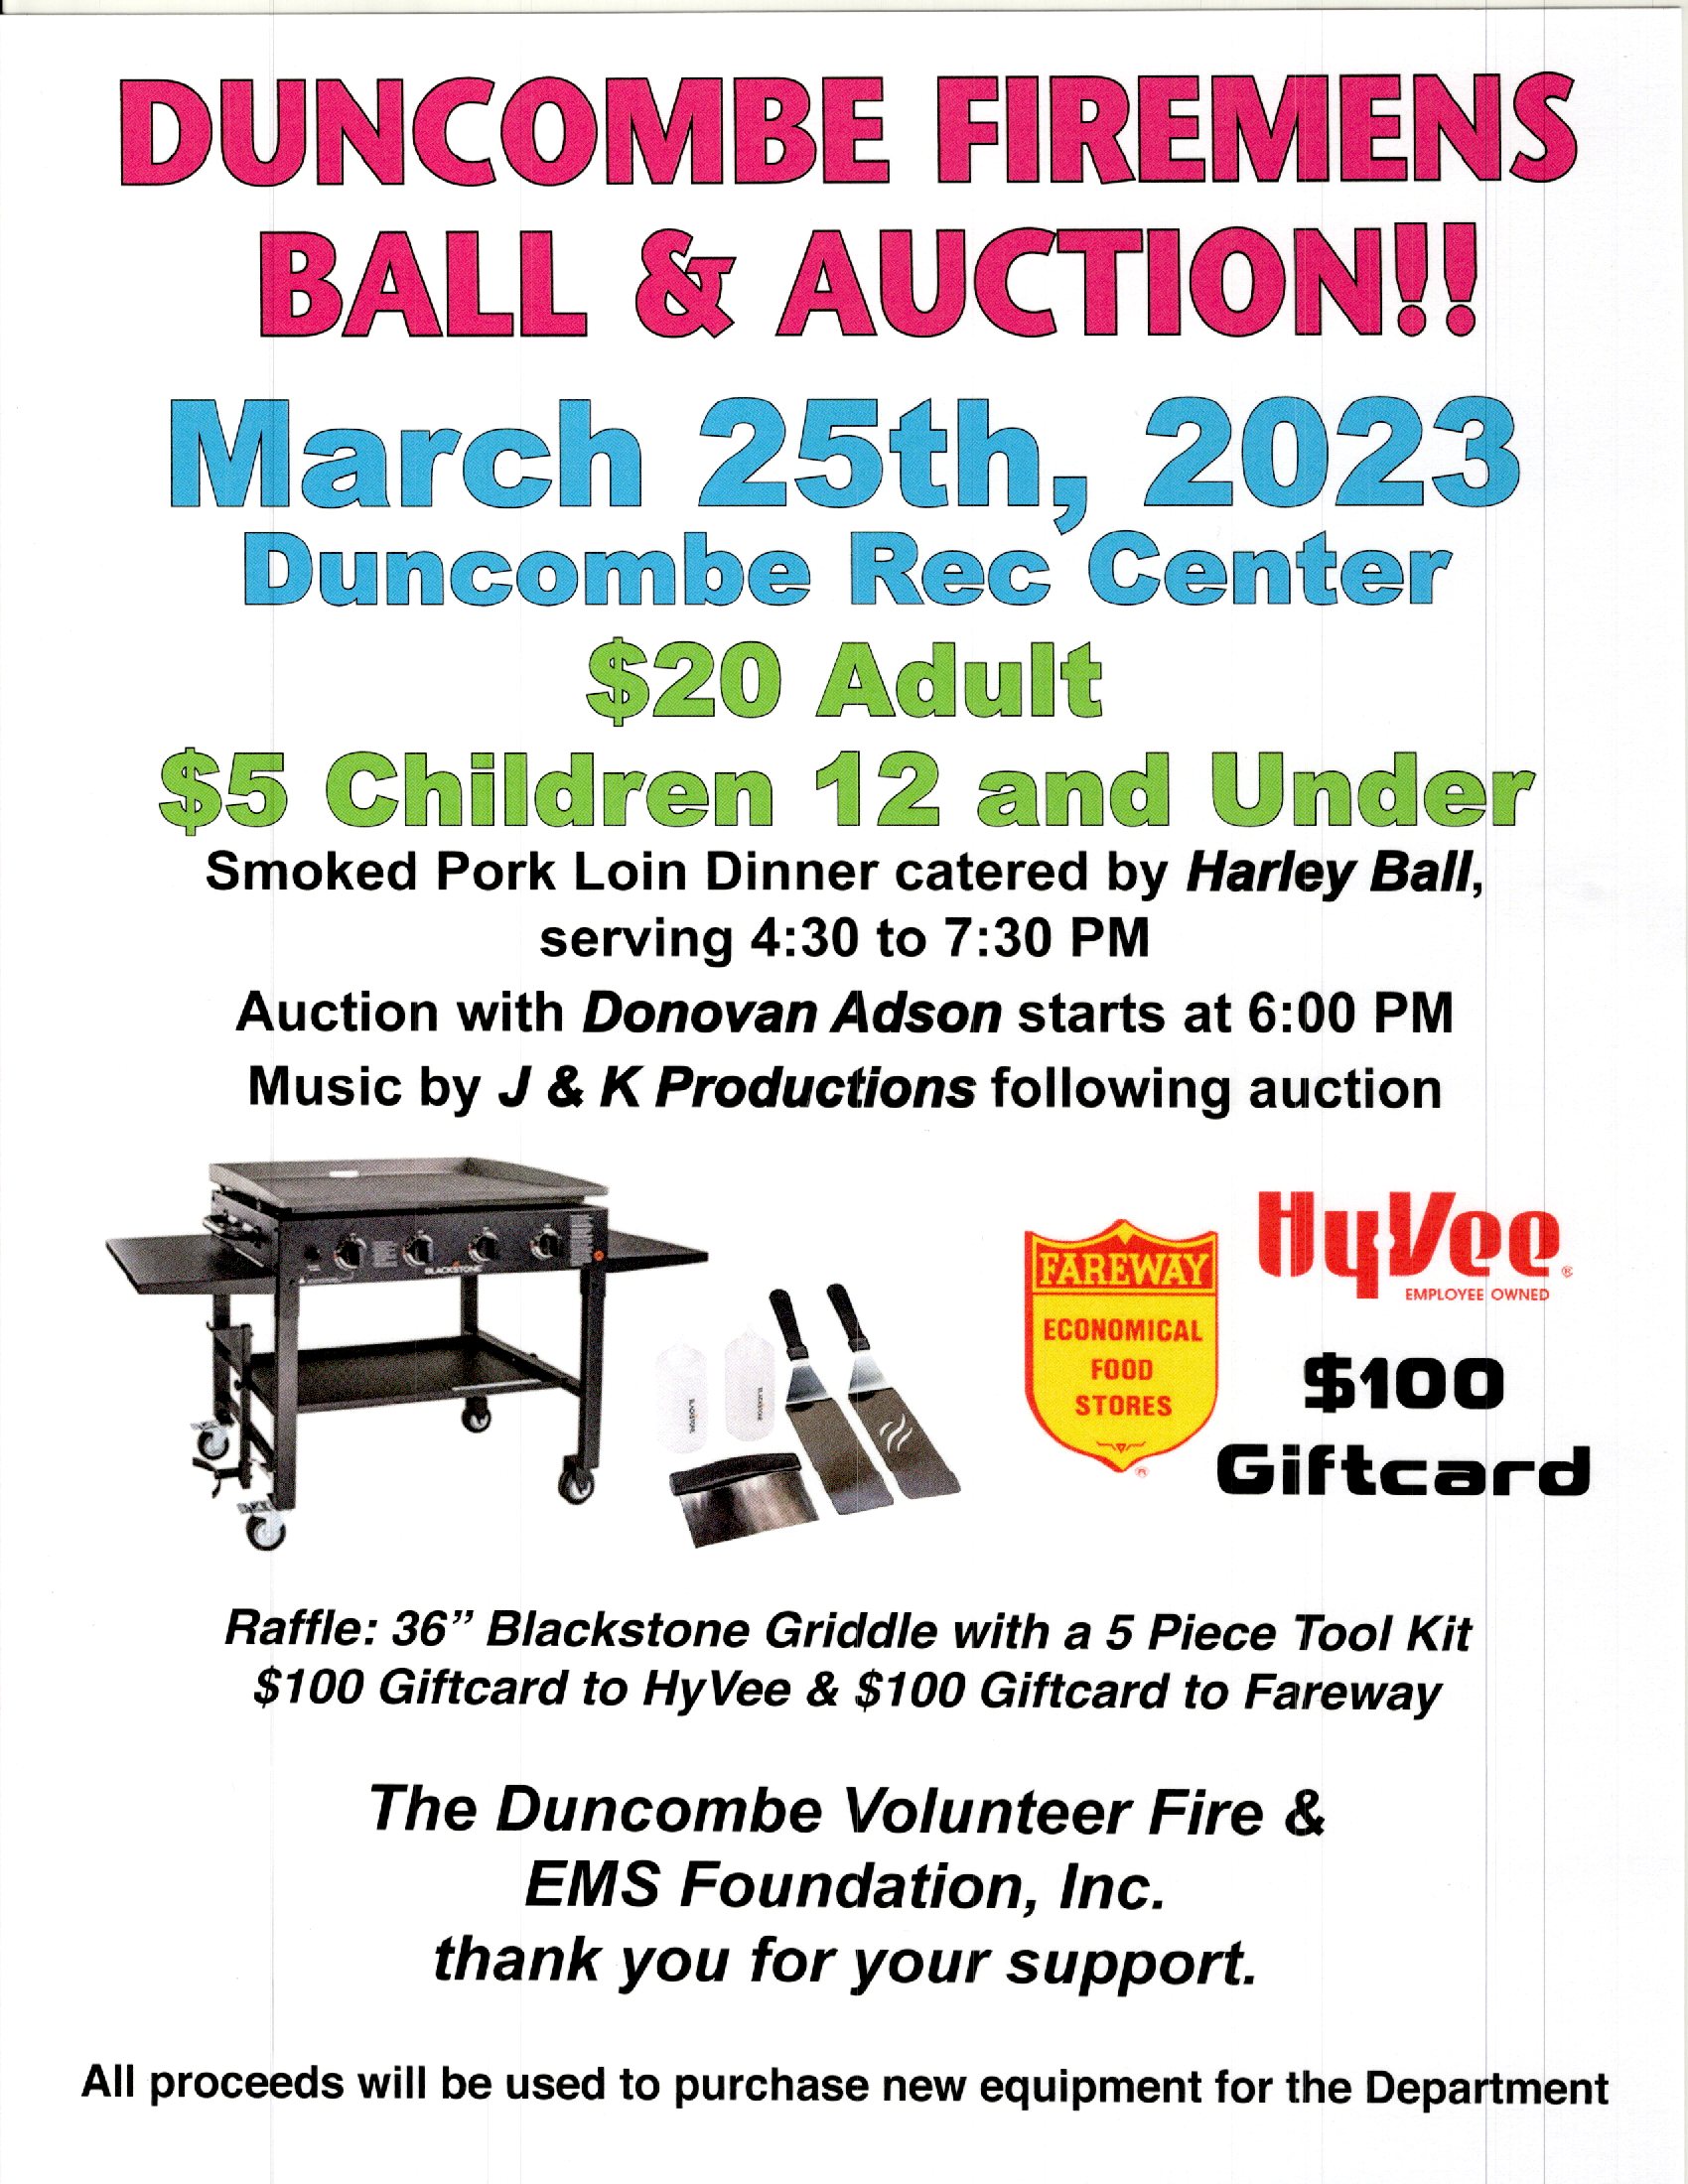 <h1 class="tribe-events-single-event-title">Duncombe’s Firemen’s ball and Auction</h1>